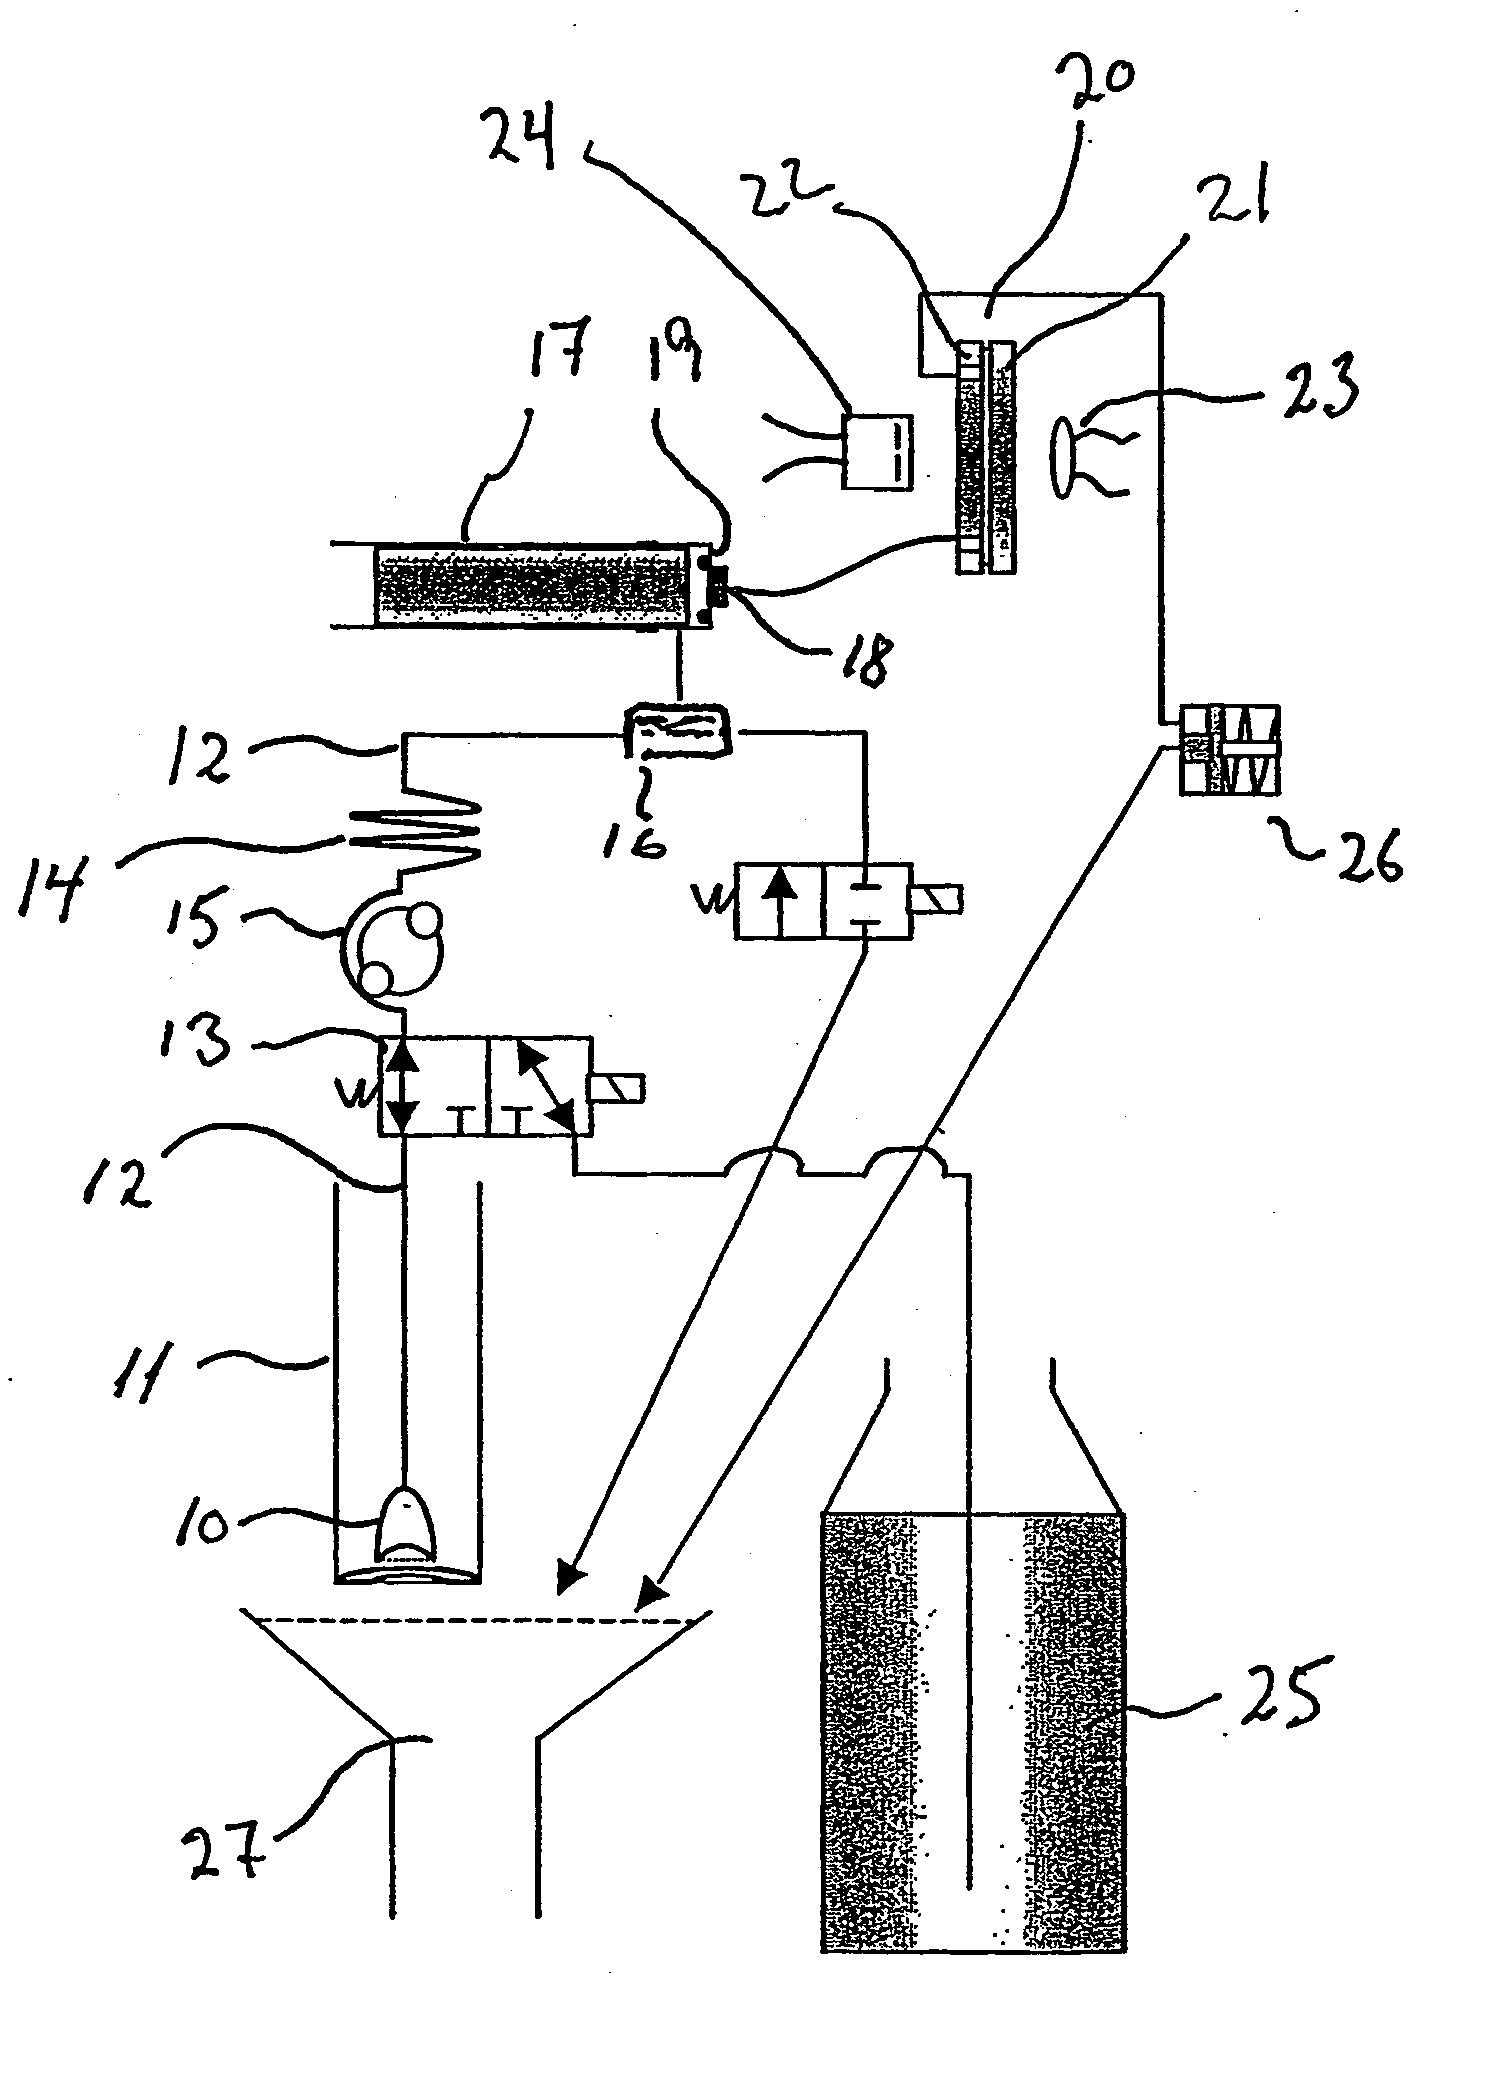 Method and a spectrometer for quantitative determination of a constituent in a sample